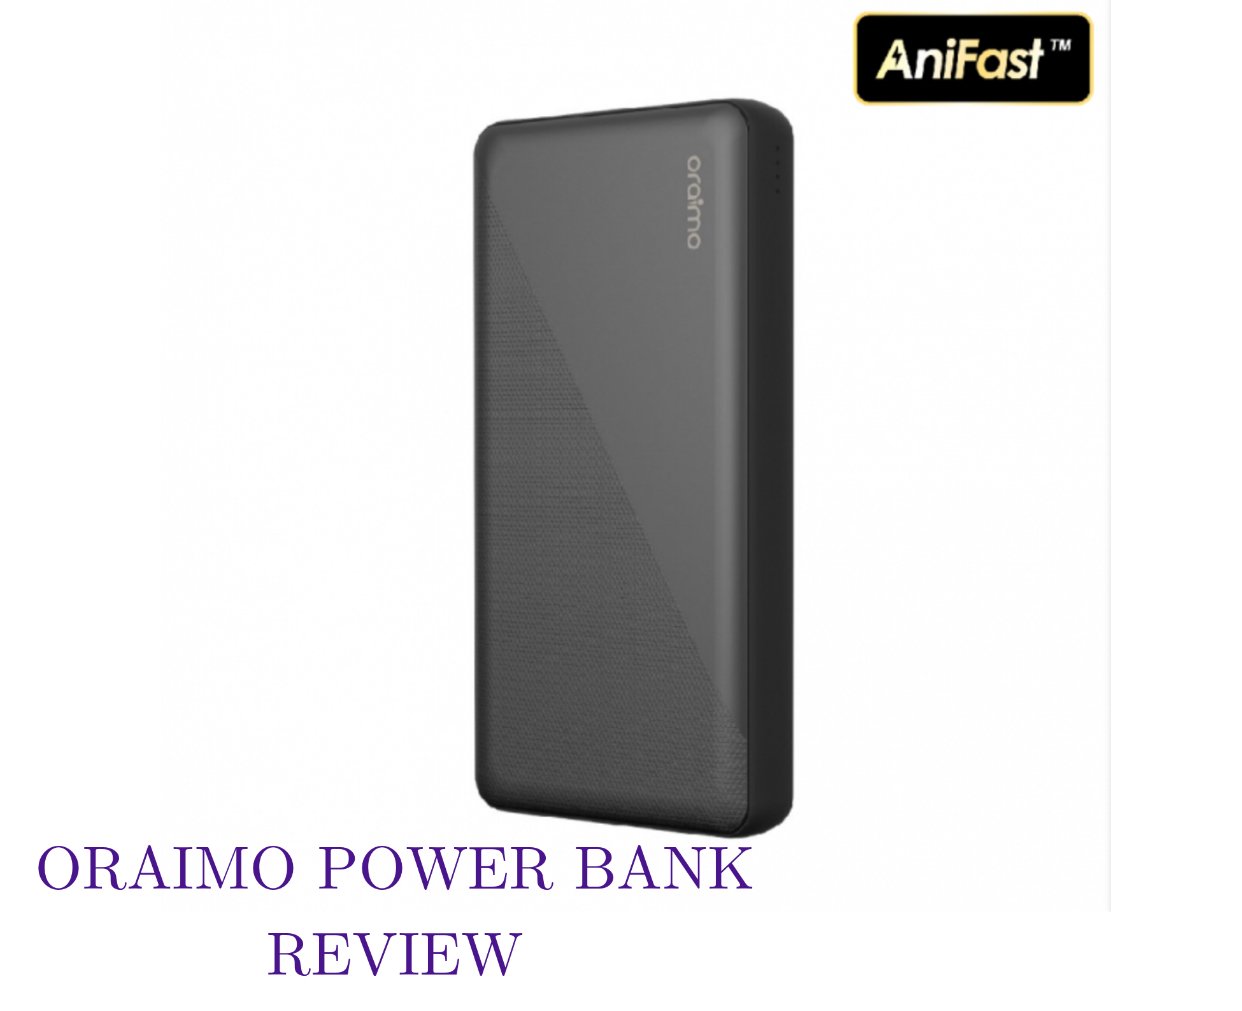 Oraimo power bank 20000mah (features,  reviews,  pics, price, where to buy it